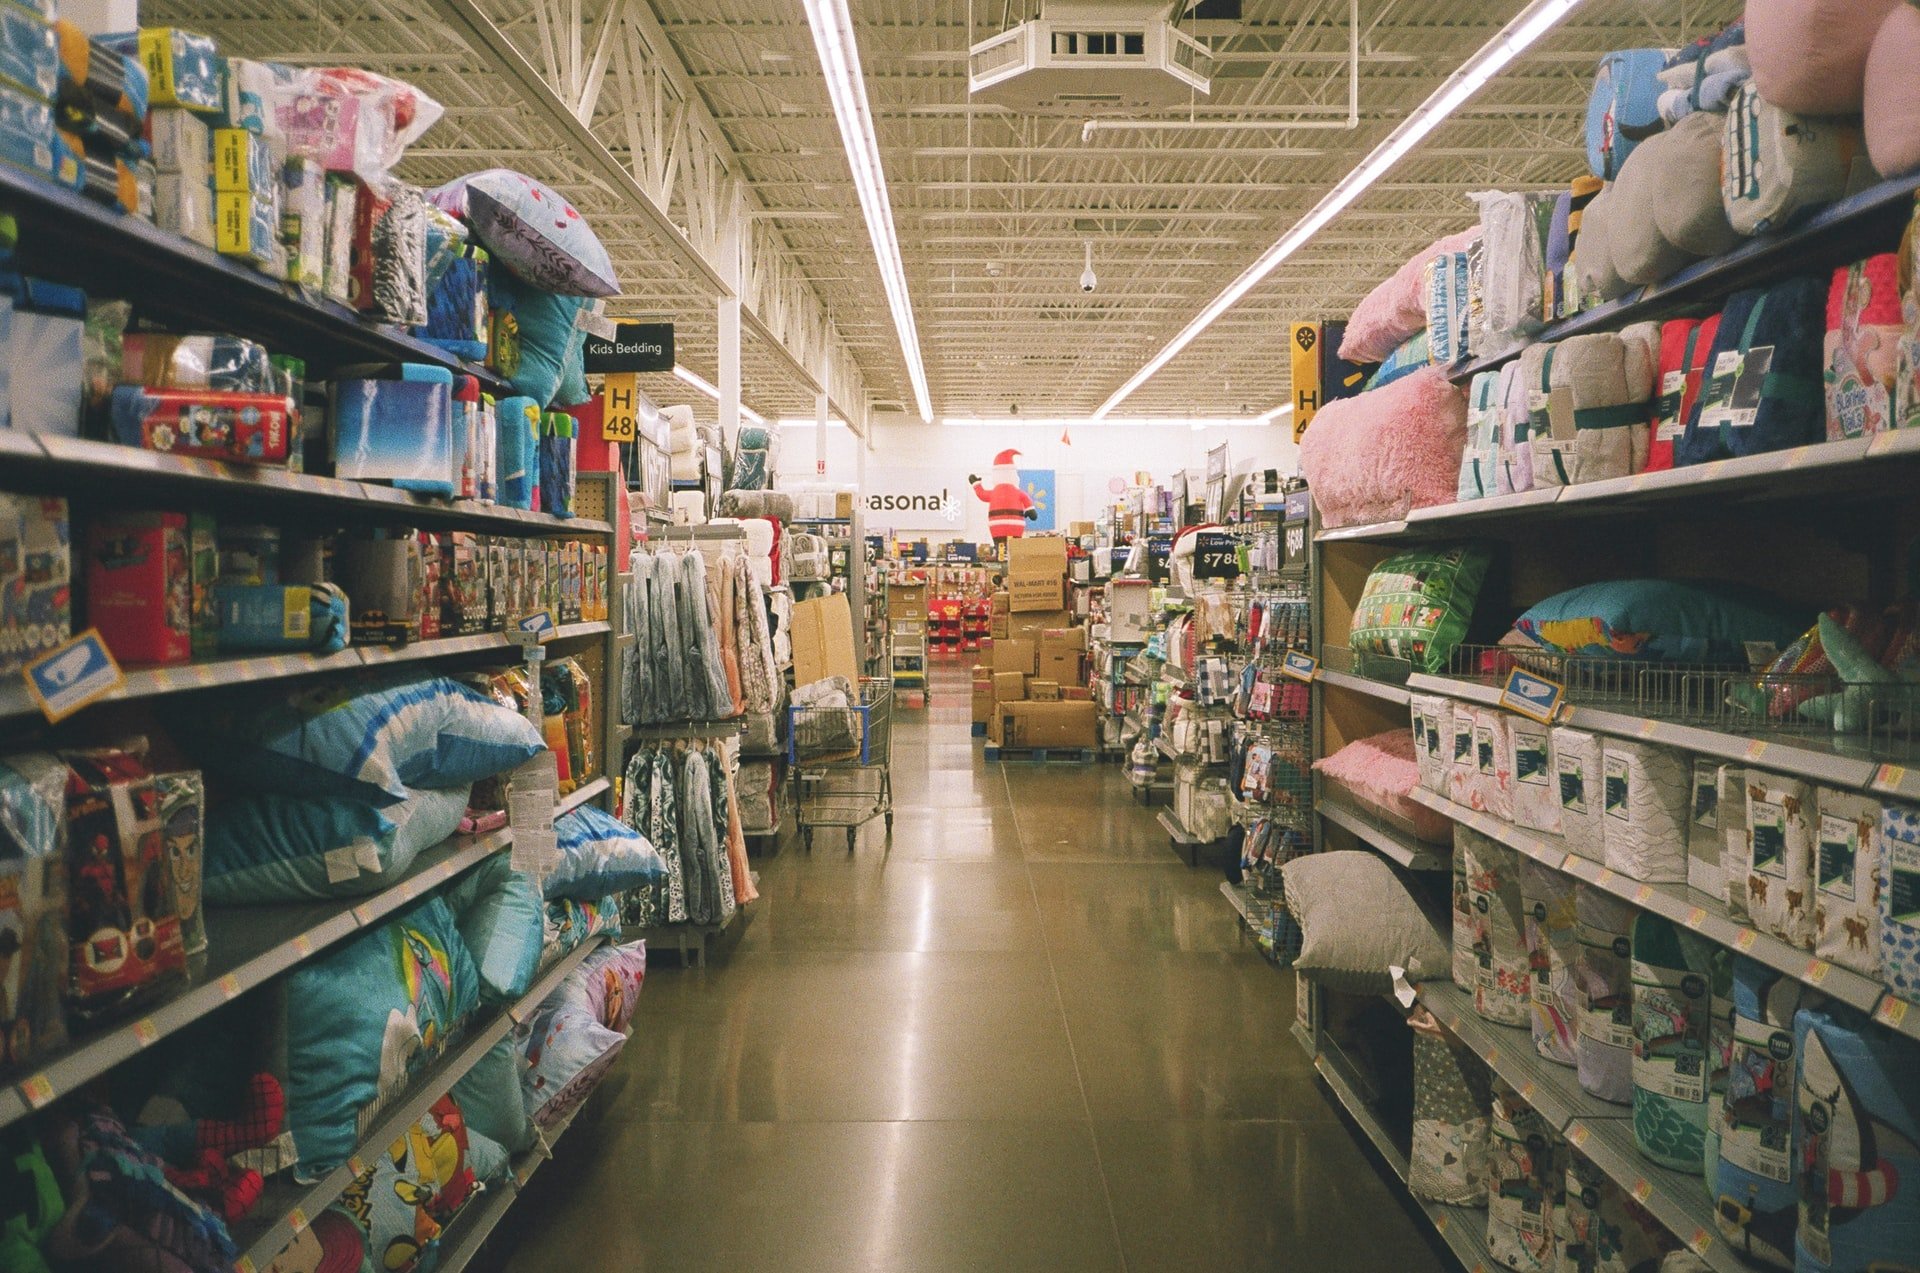 OP fell on the ground in the middle of the aisle | Source: Unsplash